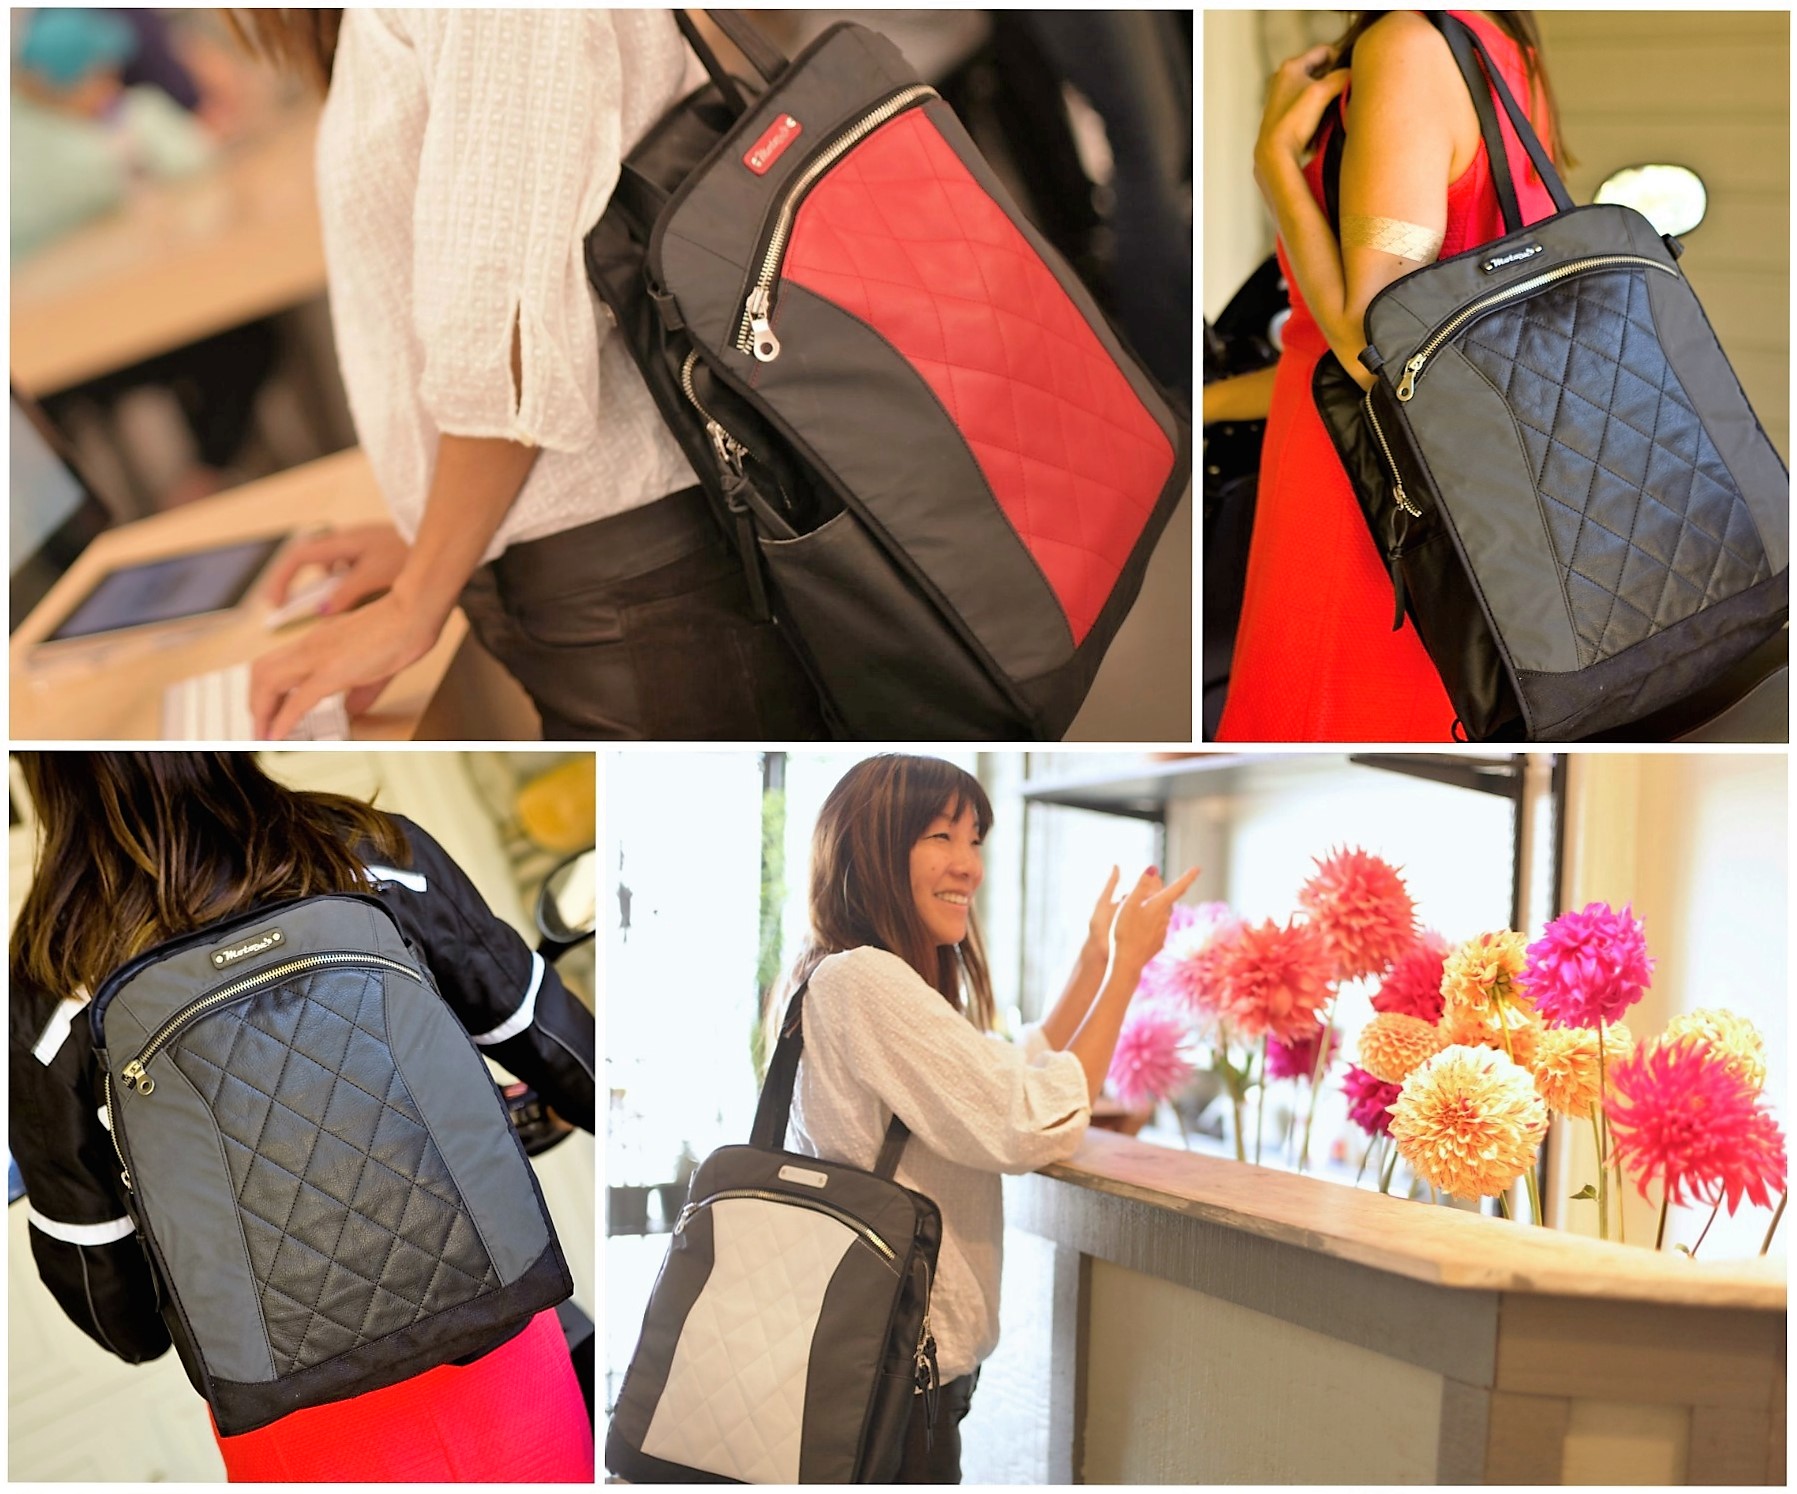 MotoChic® Gear Bags Are the Perfect Holiday Gift For The Woman on the Move!